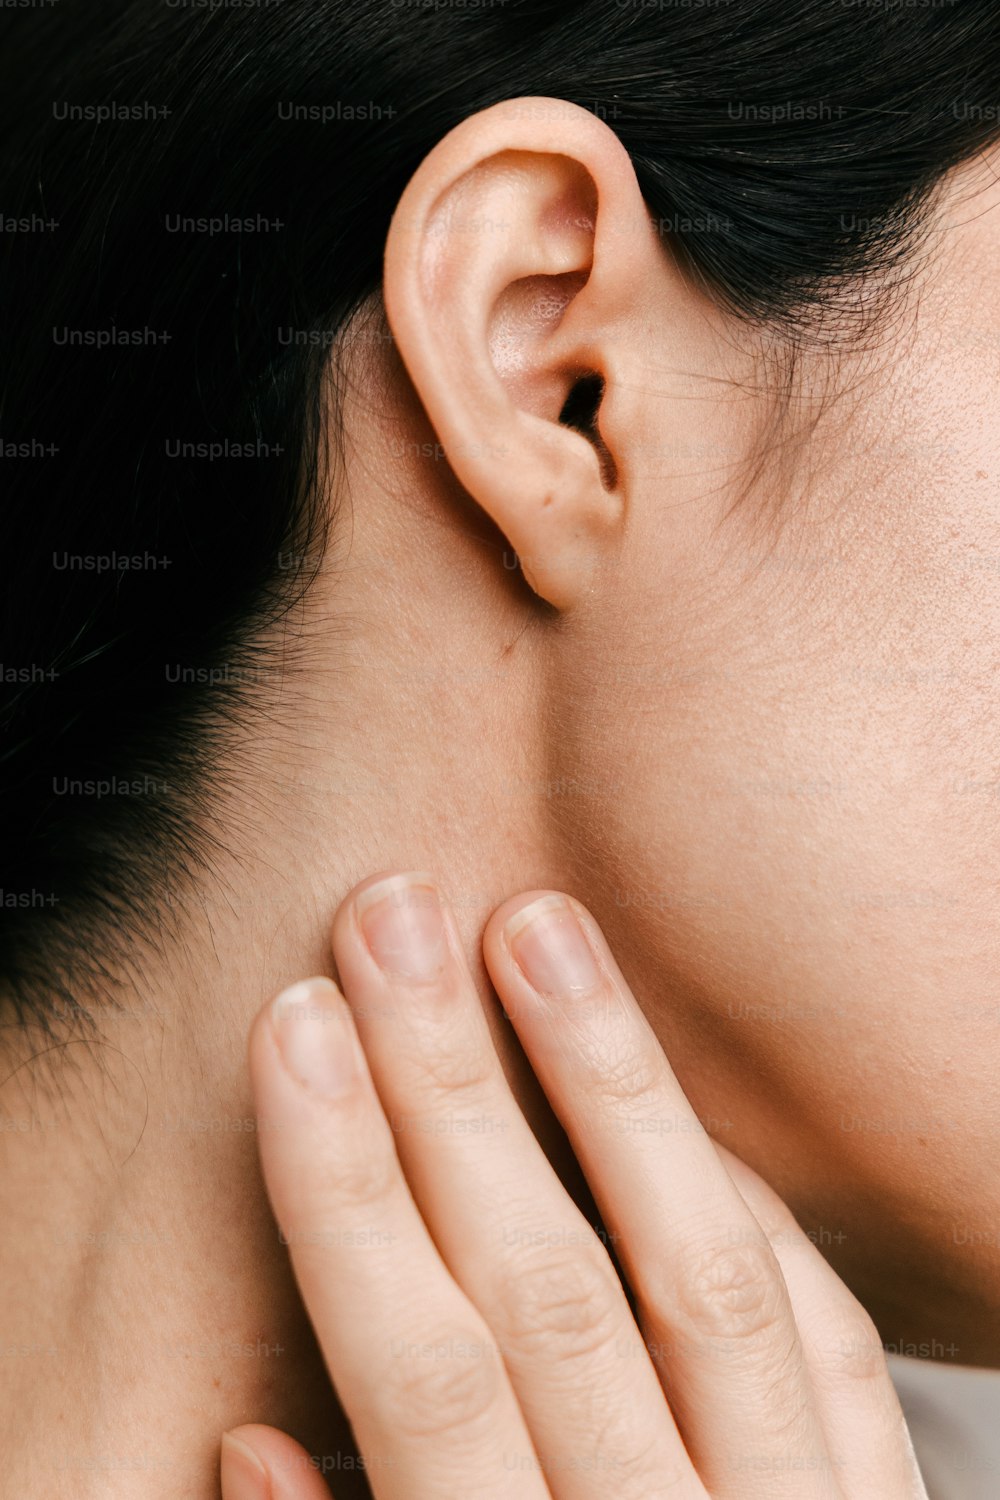 a close up of a person touching their ear